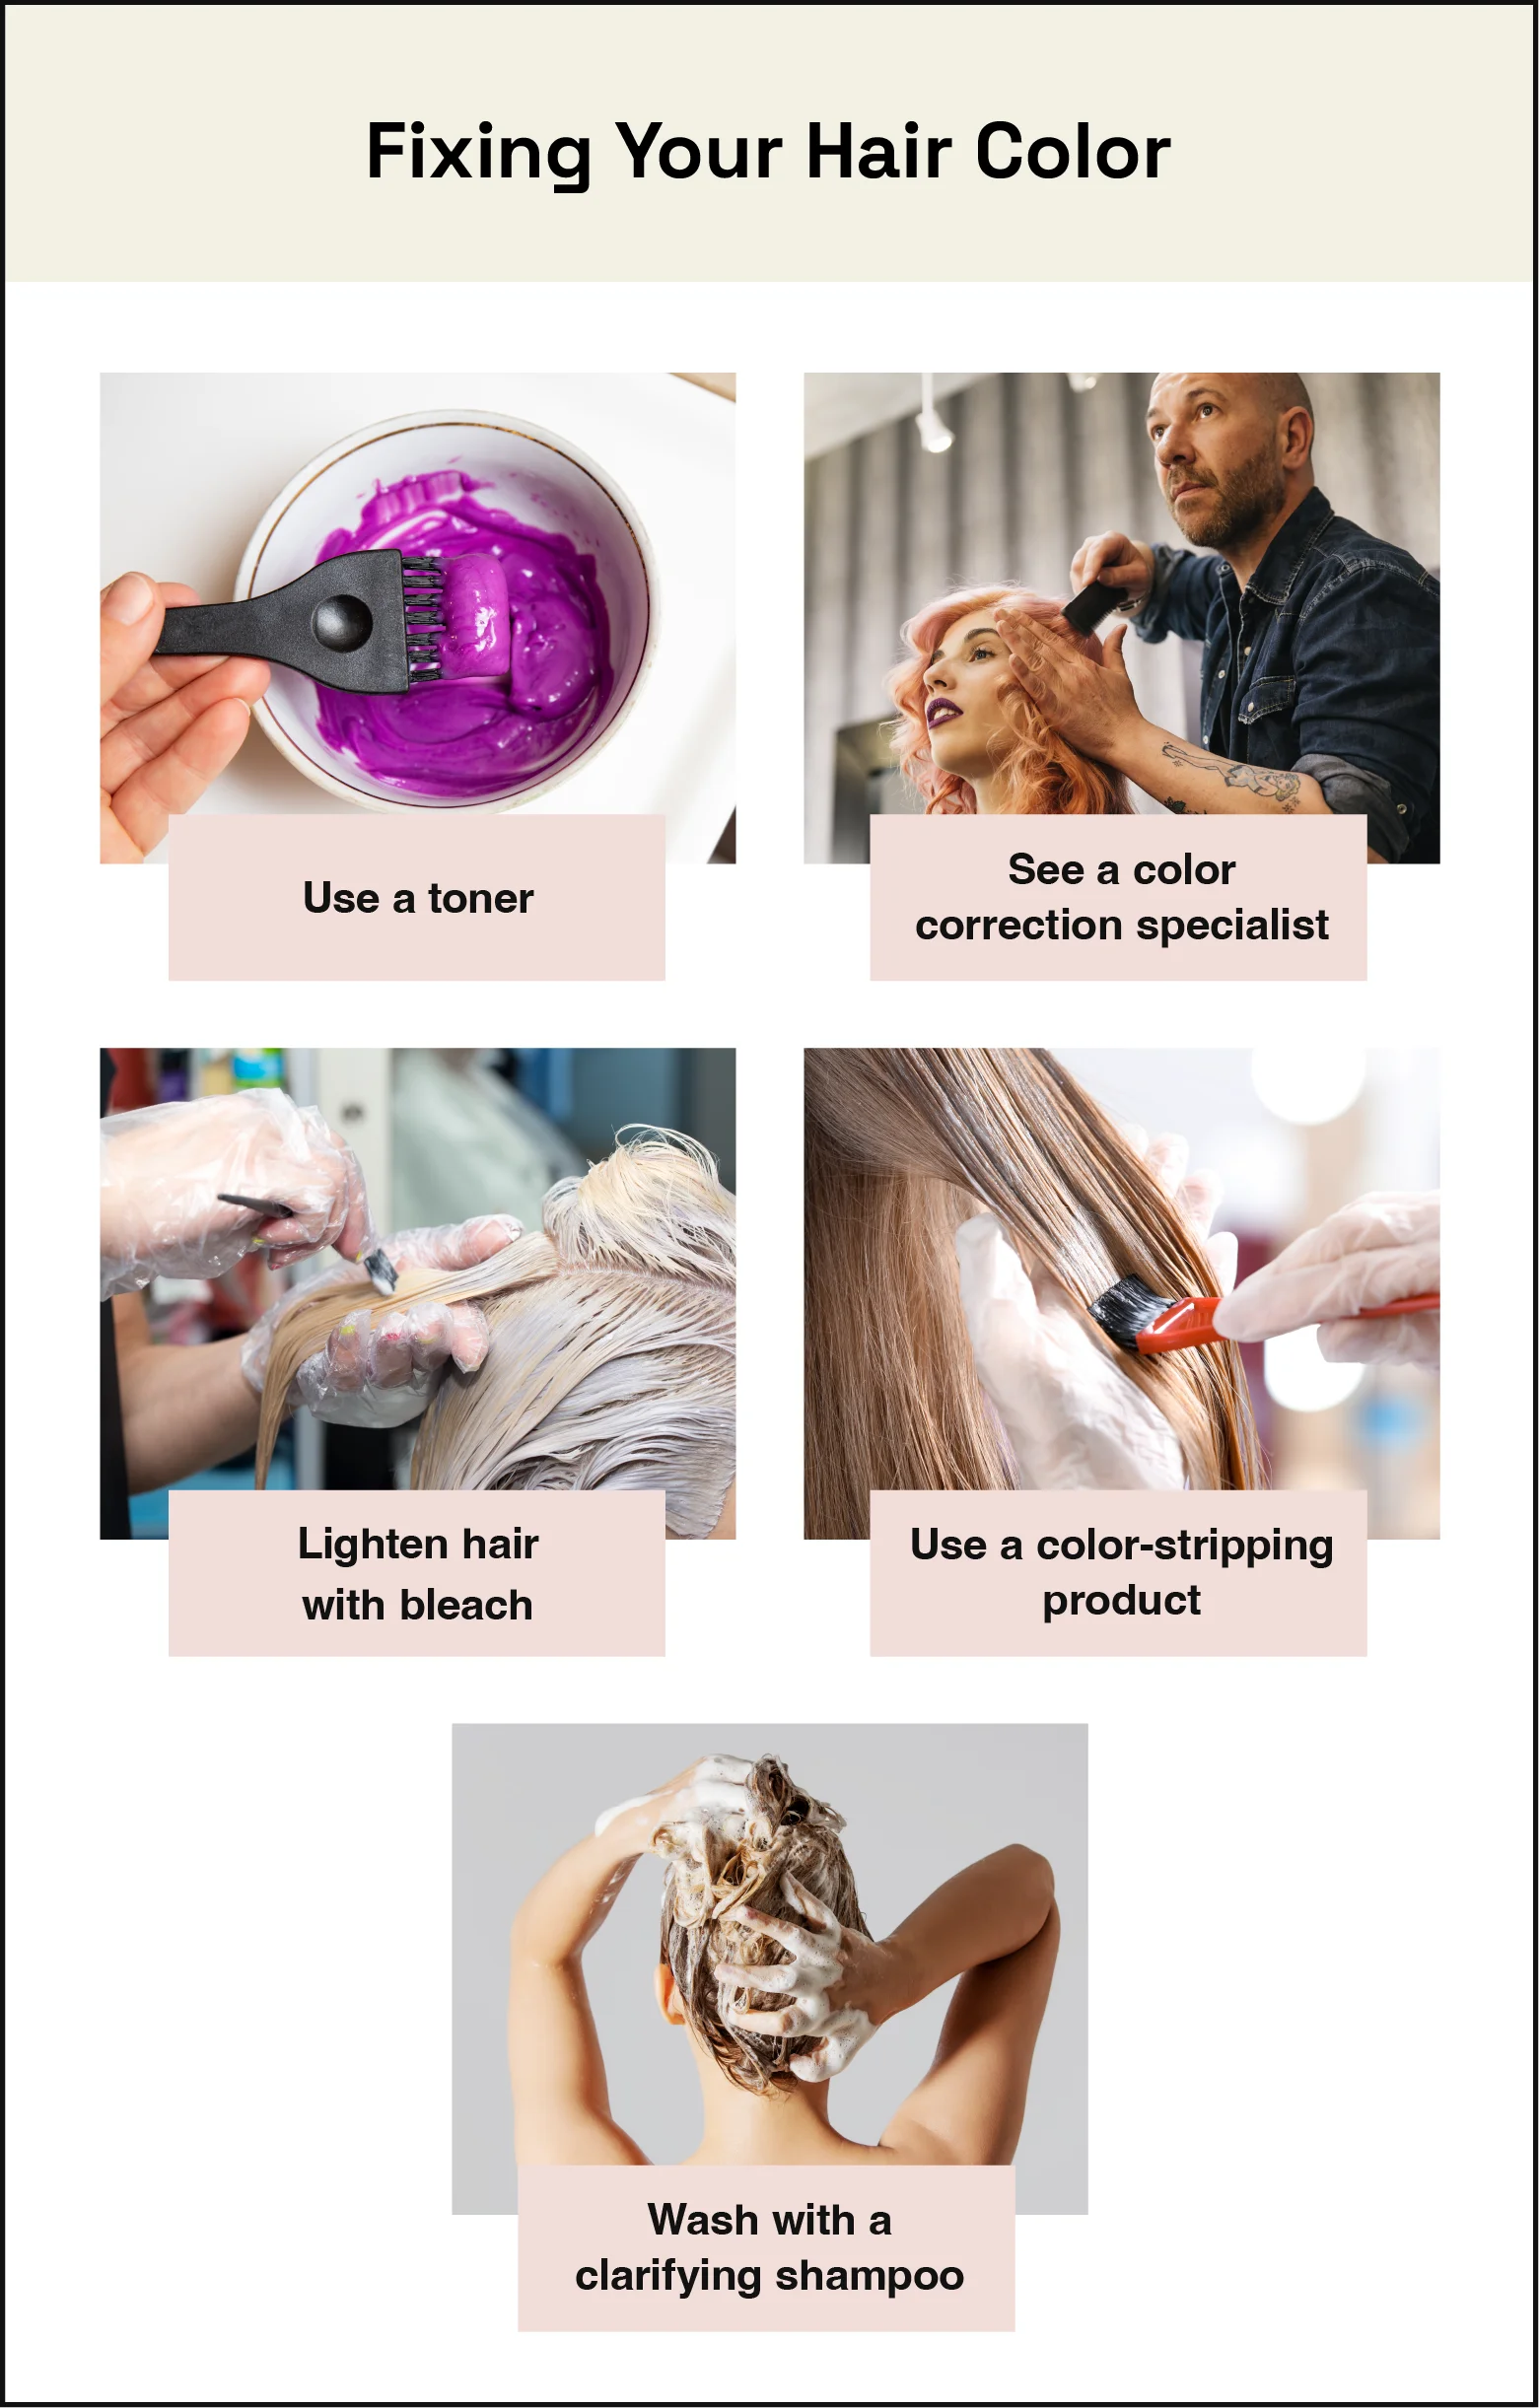 To correct your hair color you can try using a toner, lightening with bleach, using a color stripping product, washing with a clarifying shampoo, or seeing a color correction specialist.